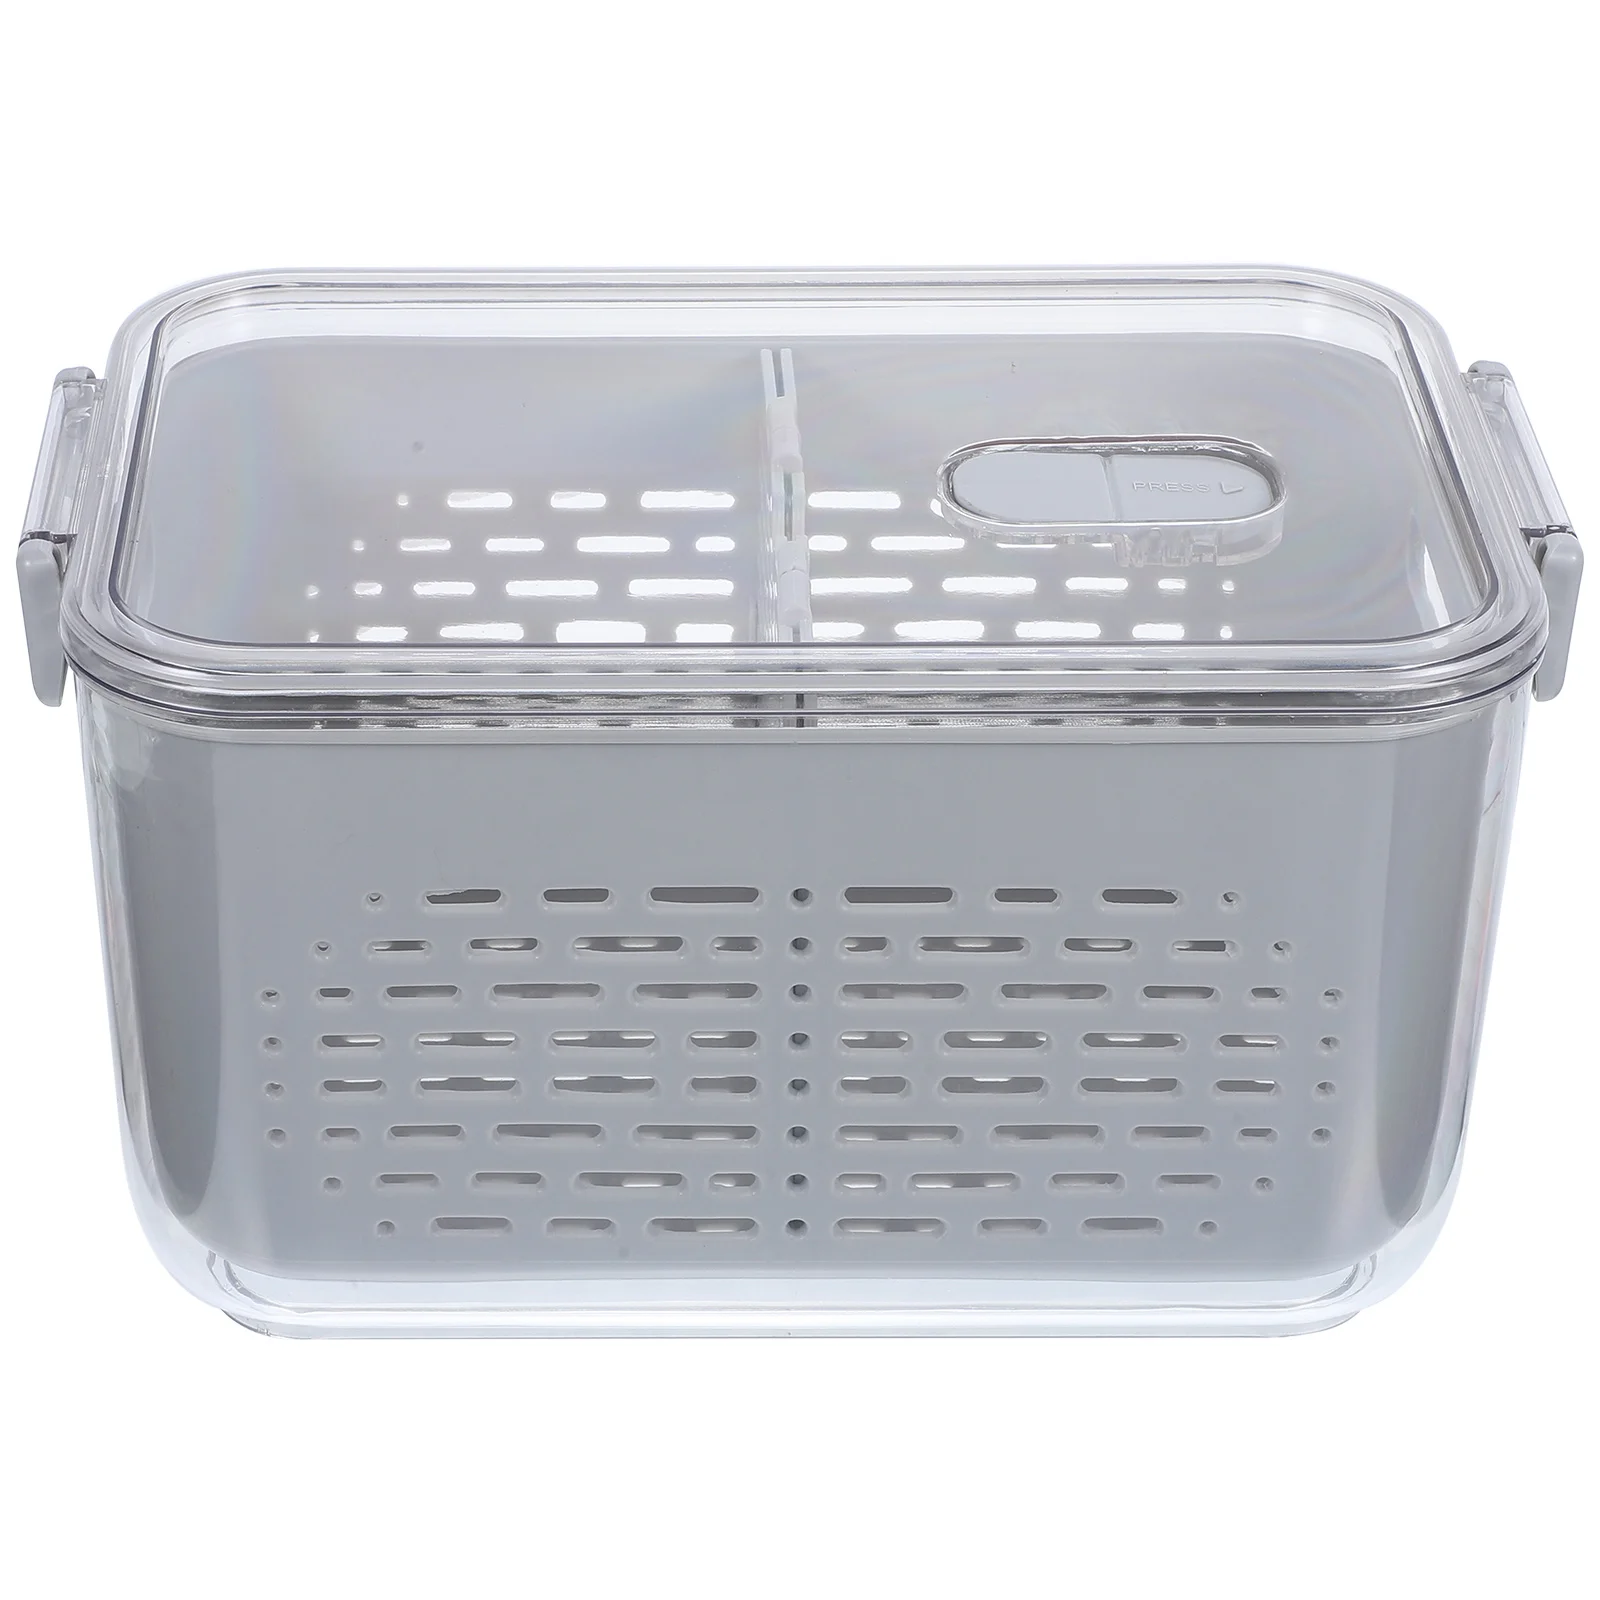 

Drained Vegetable Basket Glass Fruit Lettuce Keeper Salad Container Containers The Pet Fridge Refrigerator